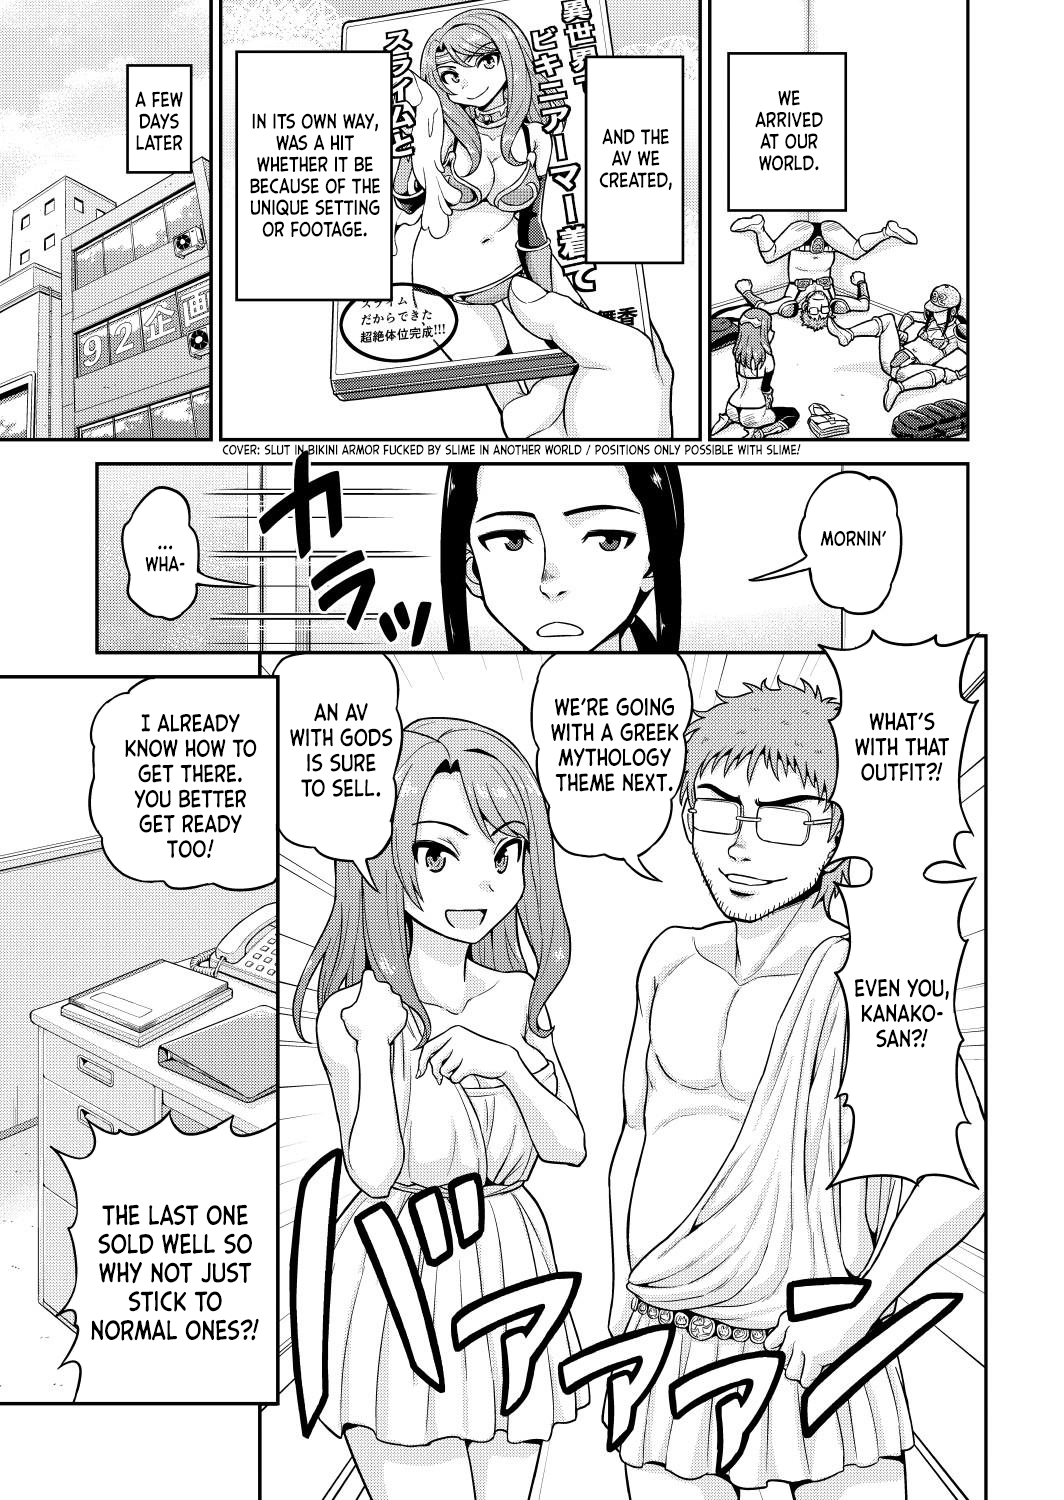 Filming Adult Videos in Another World - Chapter 1 Page 25